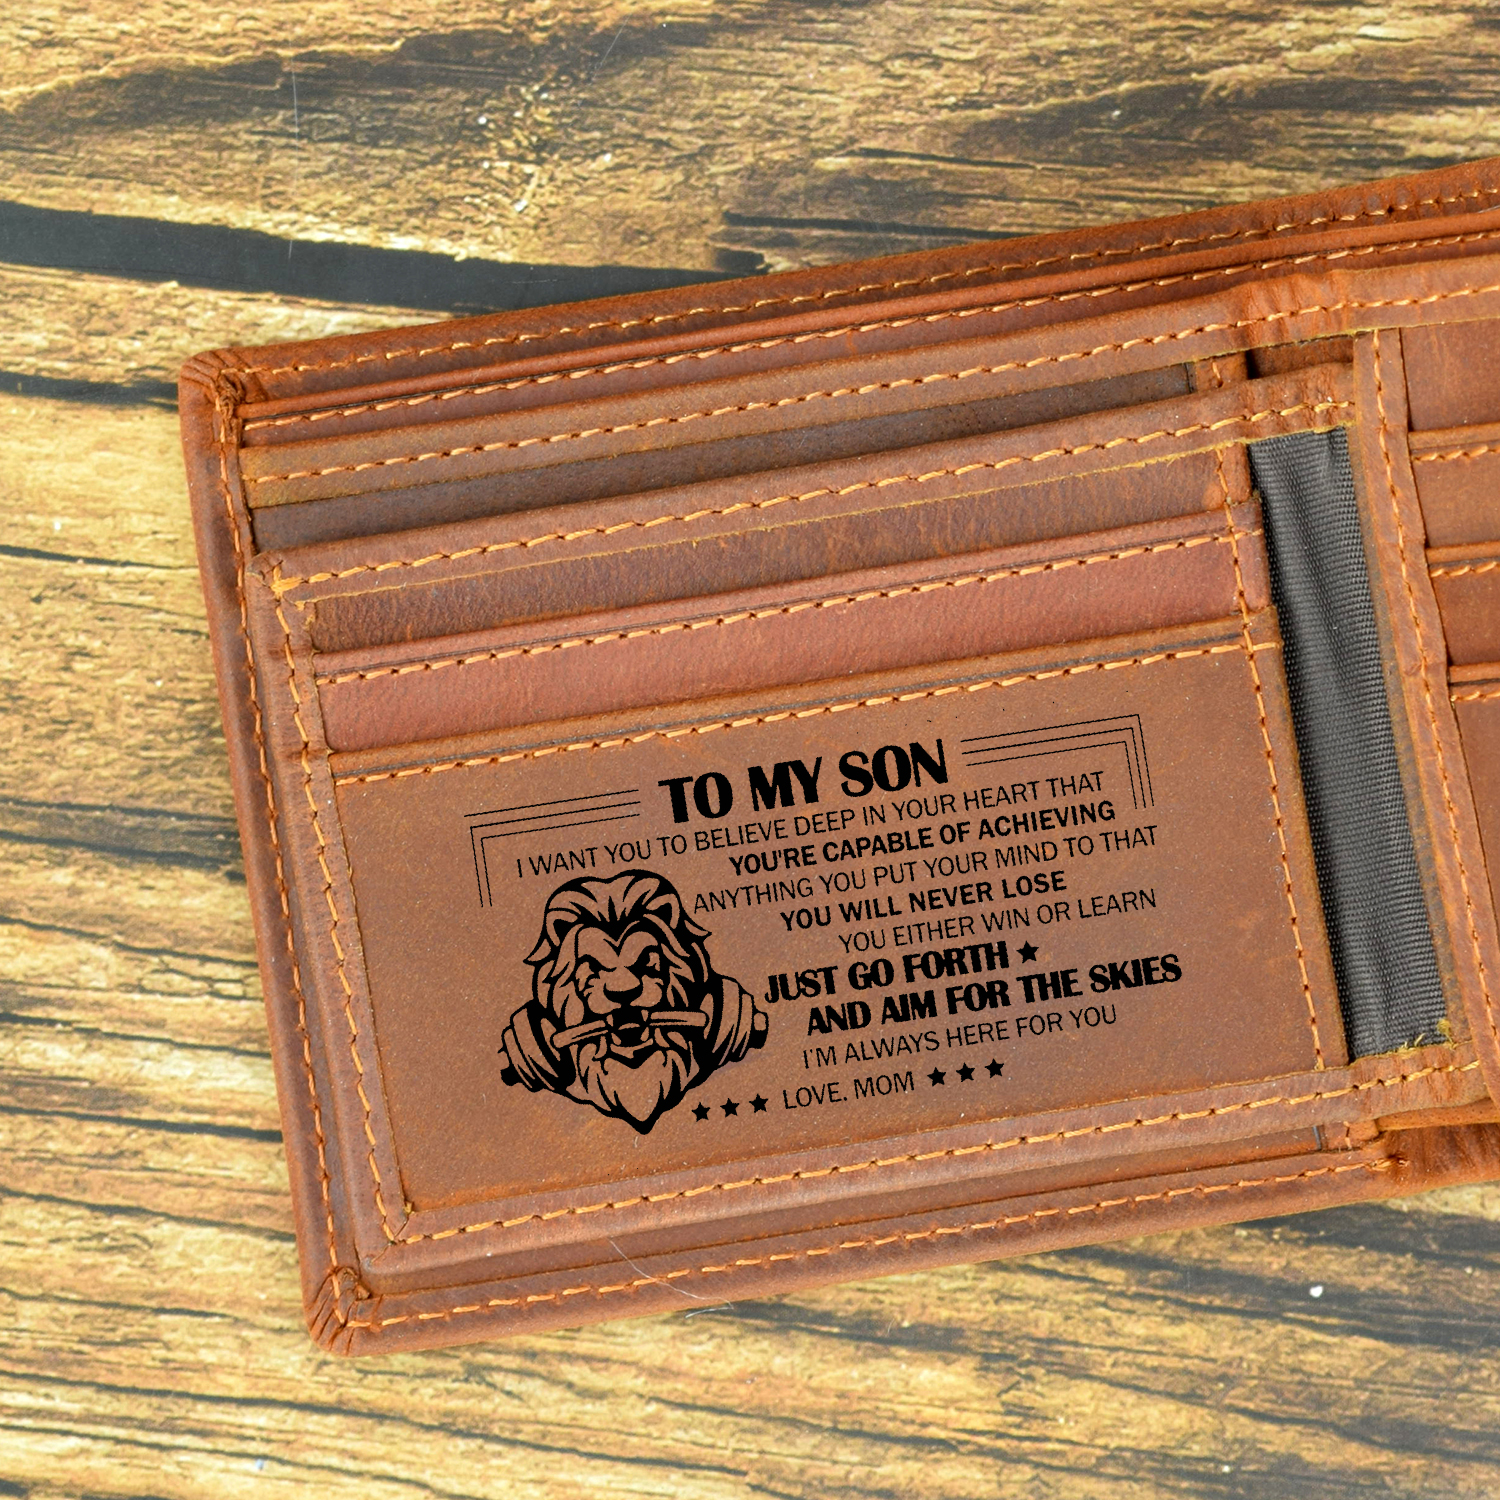 Mens Personalized Wallet - Vegan Leather